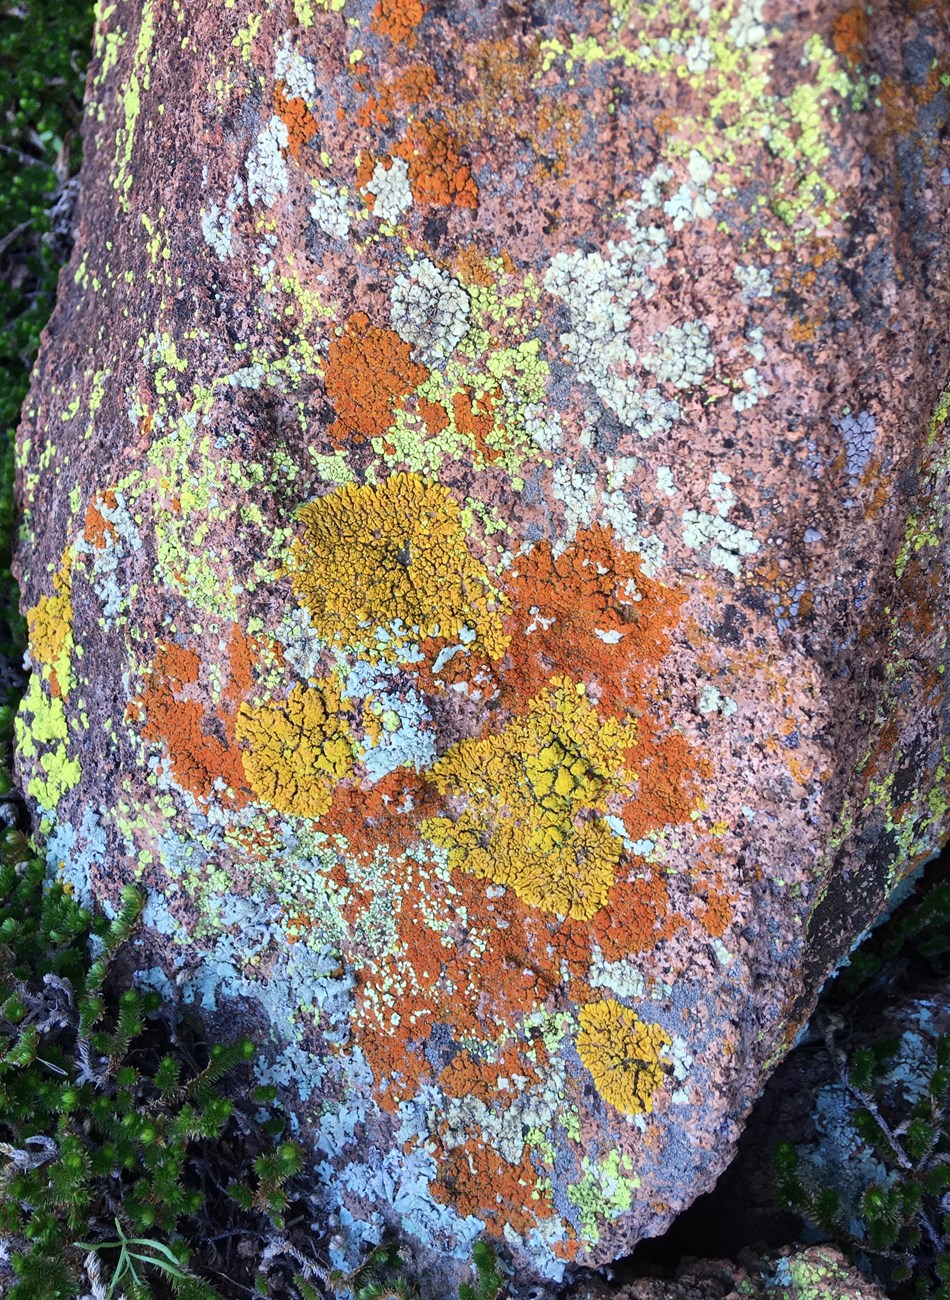 Colorful close up shot of lichens on a rock. Colors include mustard yellow, yellow green, orange, and light blue